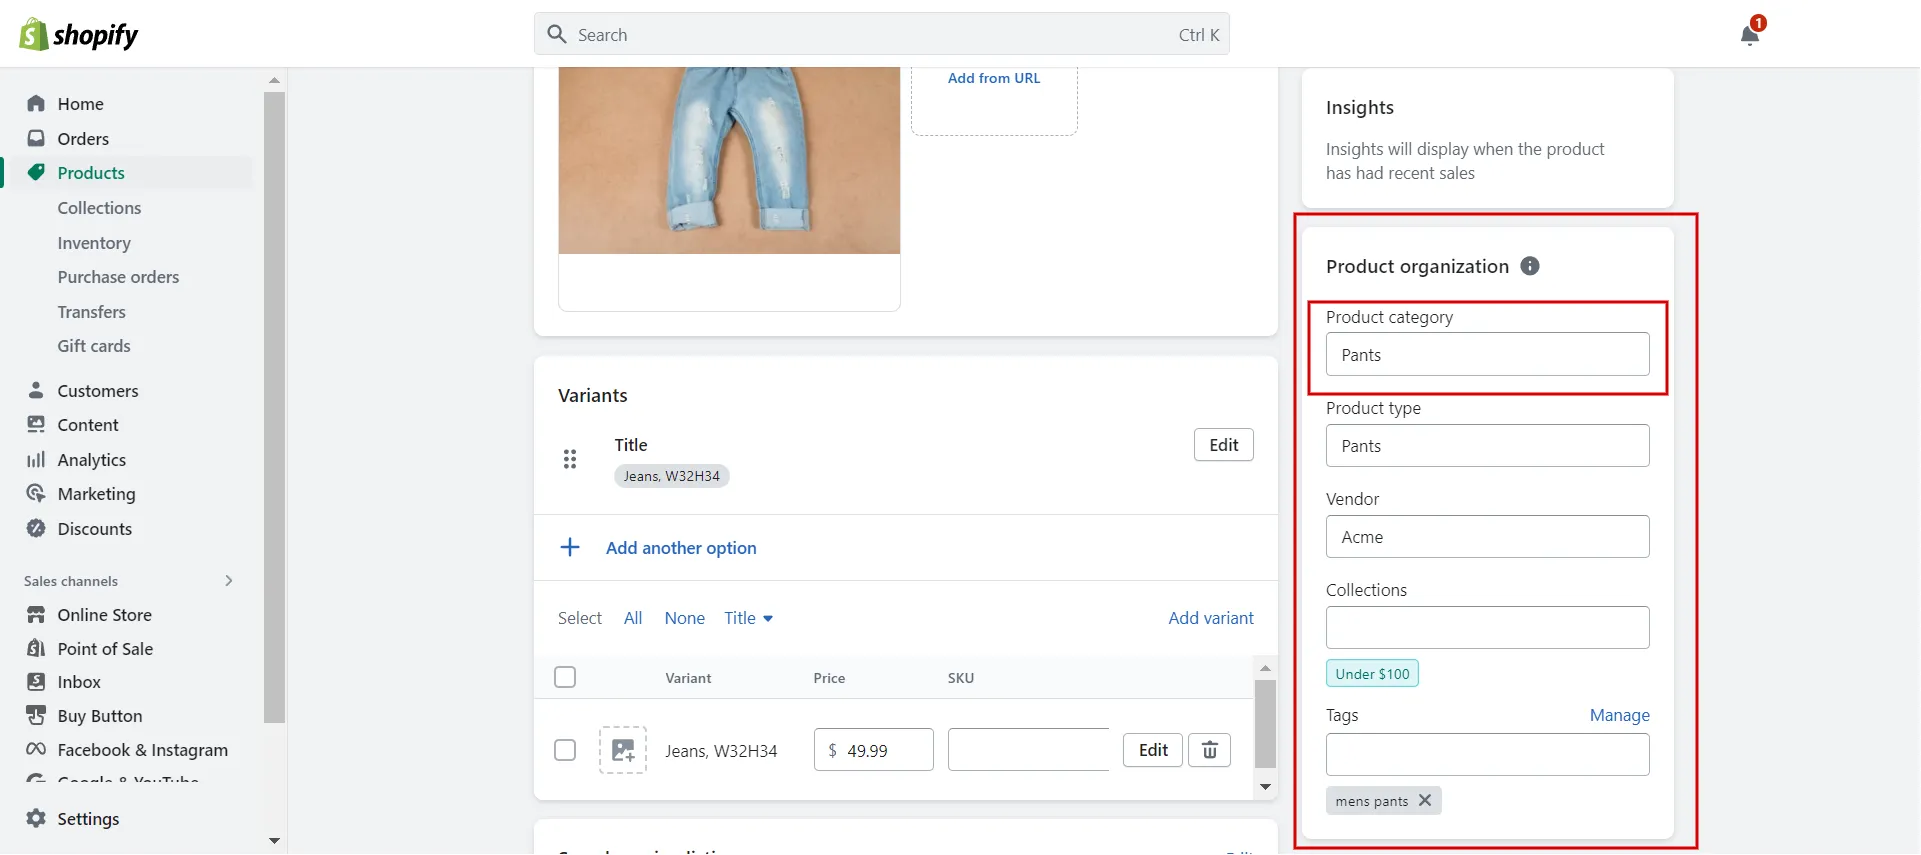 Demo of a product category in Shopify